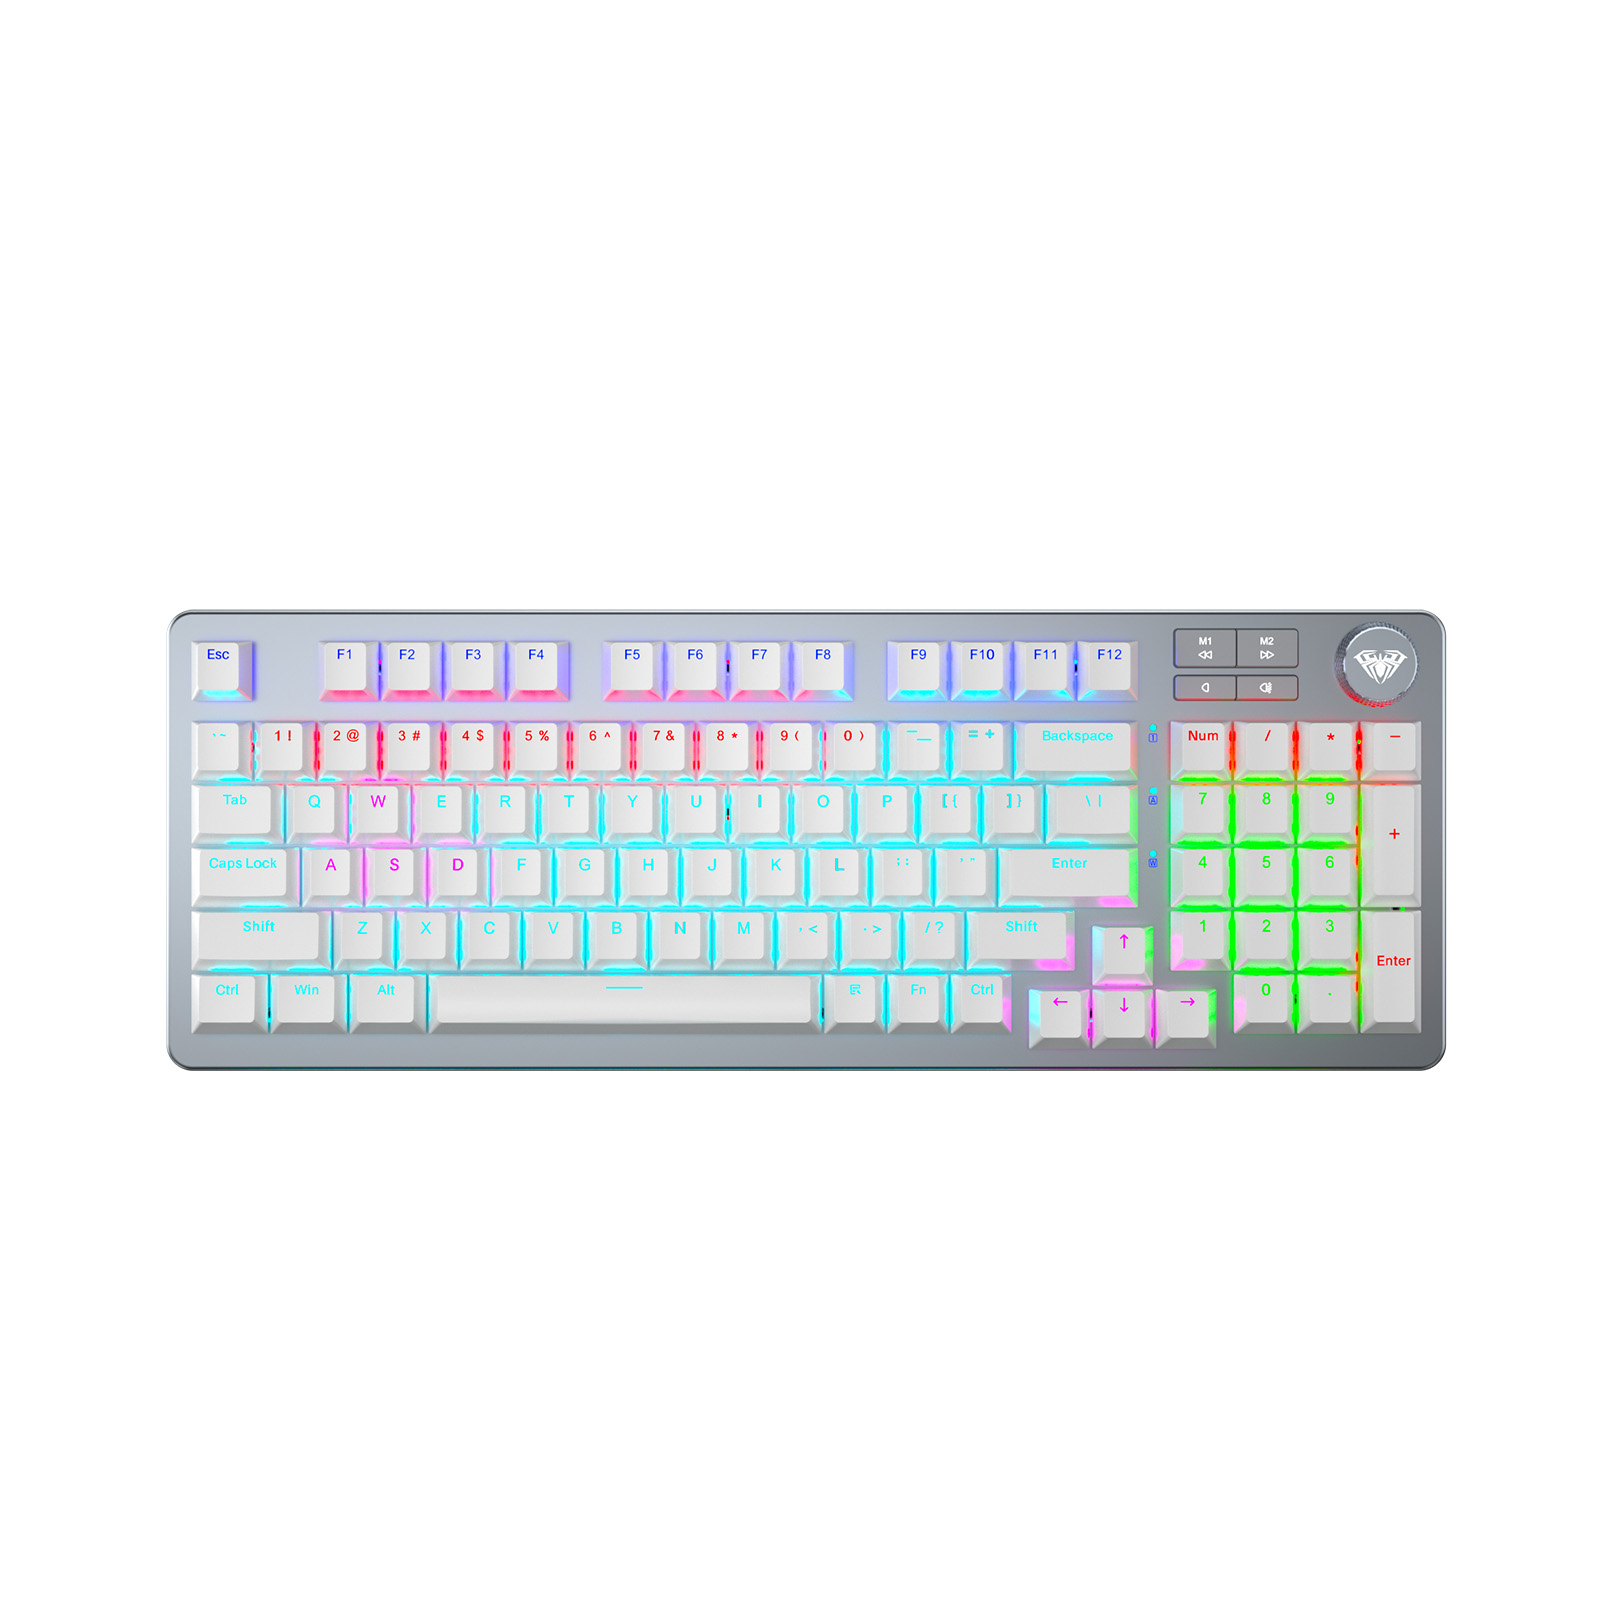 AULA F3060 83 keycaps Hot-swappable mech